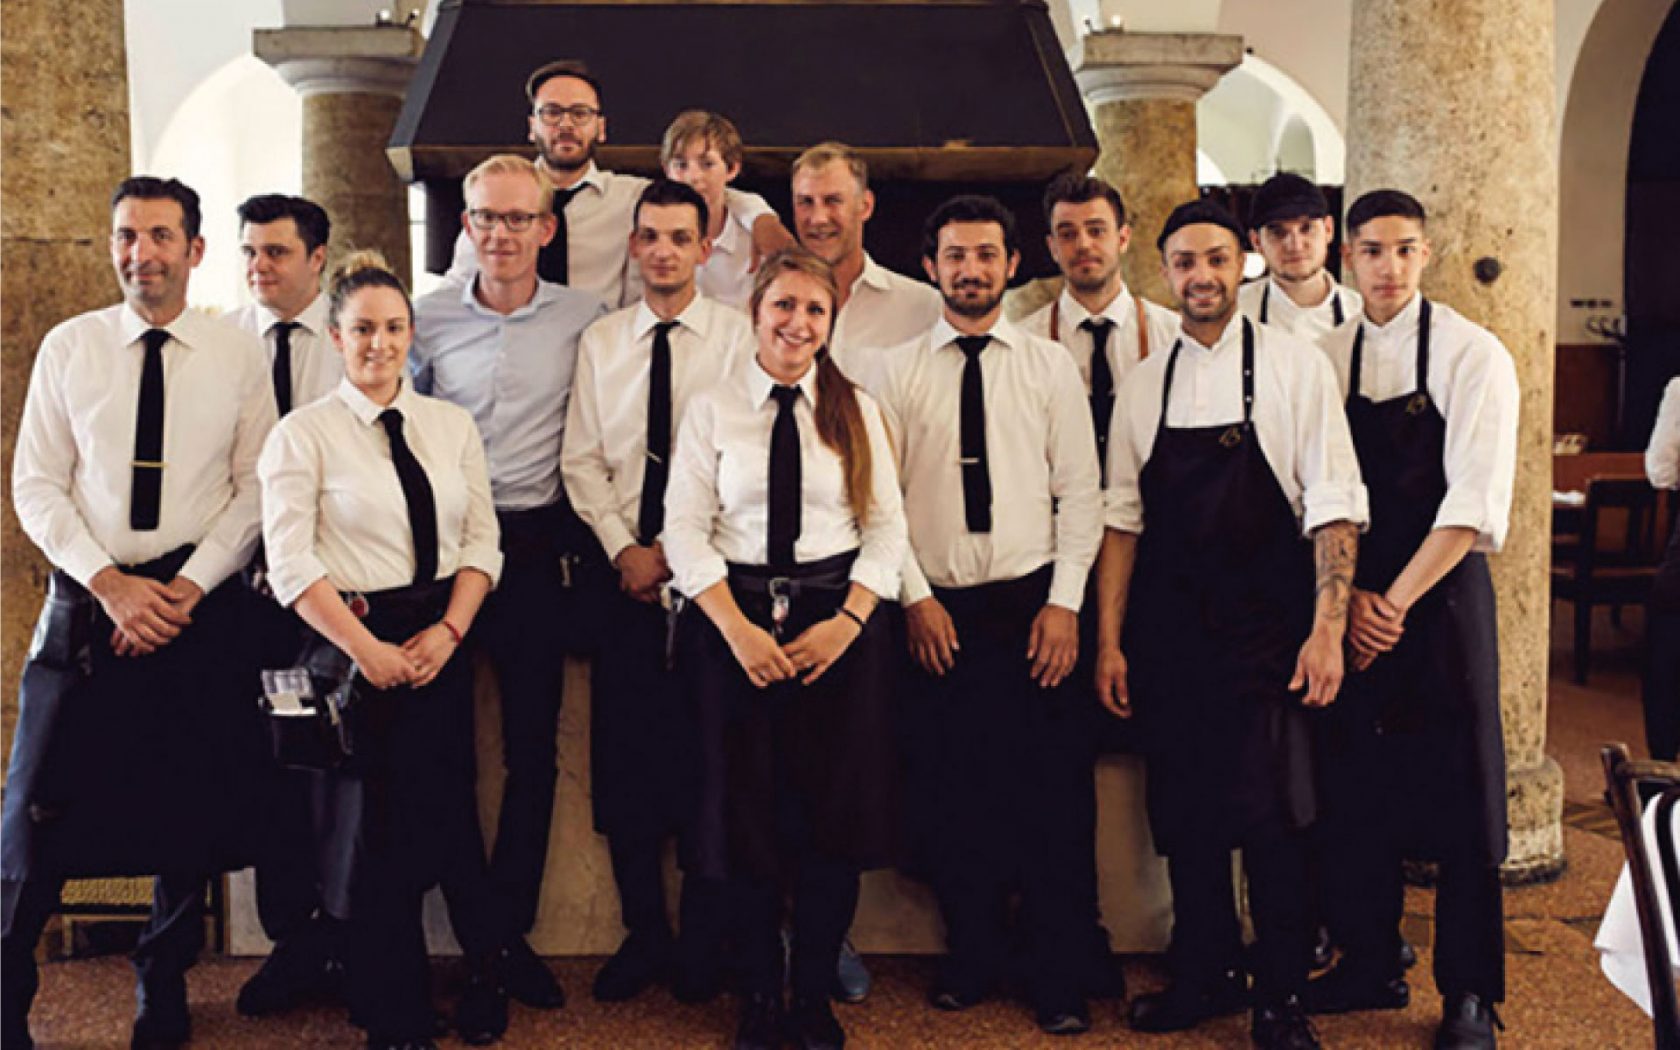 Operngrill Brenner - Servicebekleidung – Gastronomiebekleidung – Kochbekleidung –Berufsbekleidung – Hotelbekleidung - Corporate Fashion - Service – Gastronomie – Küche – acp collection GmbH – Muenchen